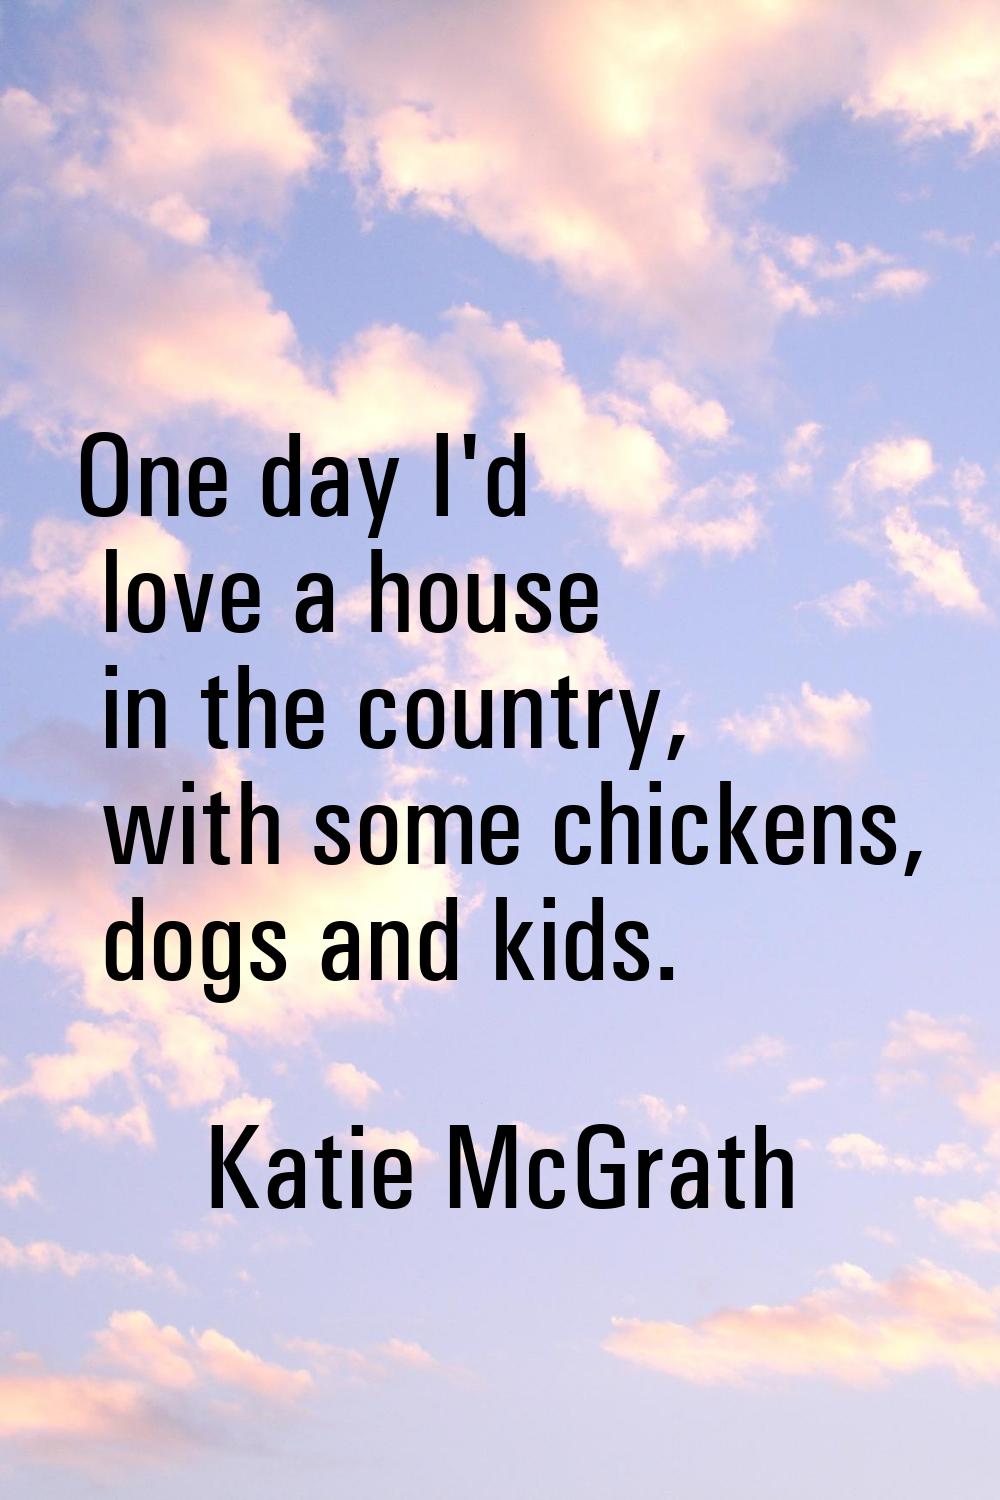 One day I'd love a house in the country, with some chickens, dogs and kids.